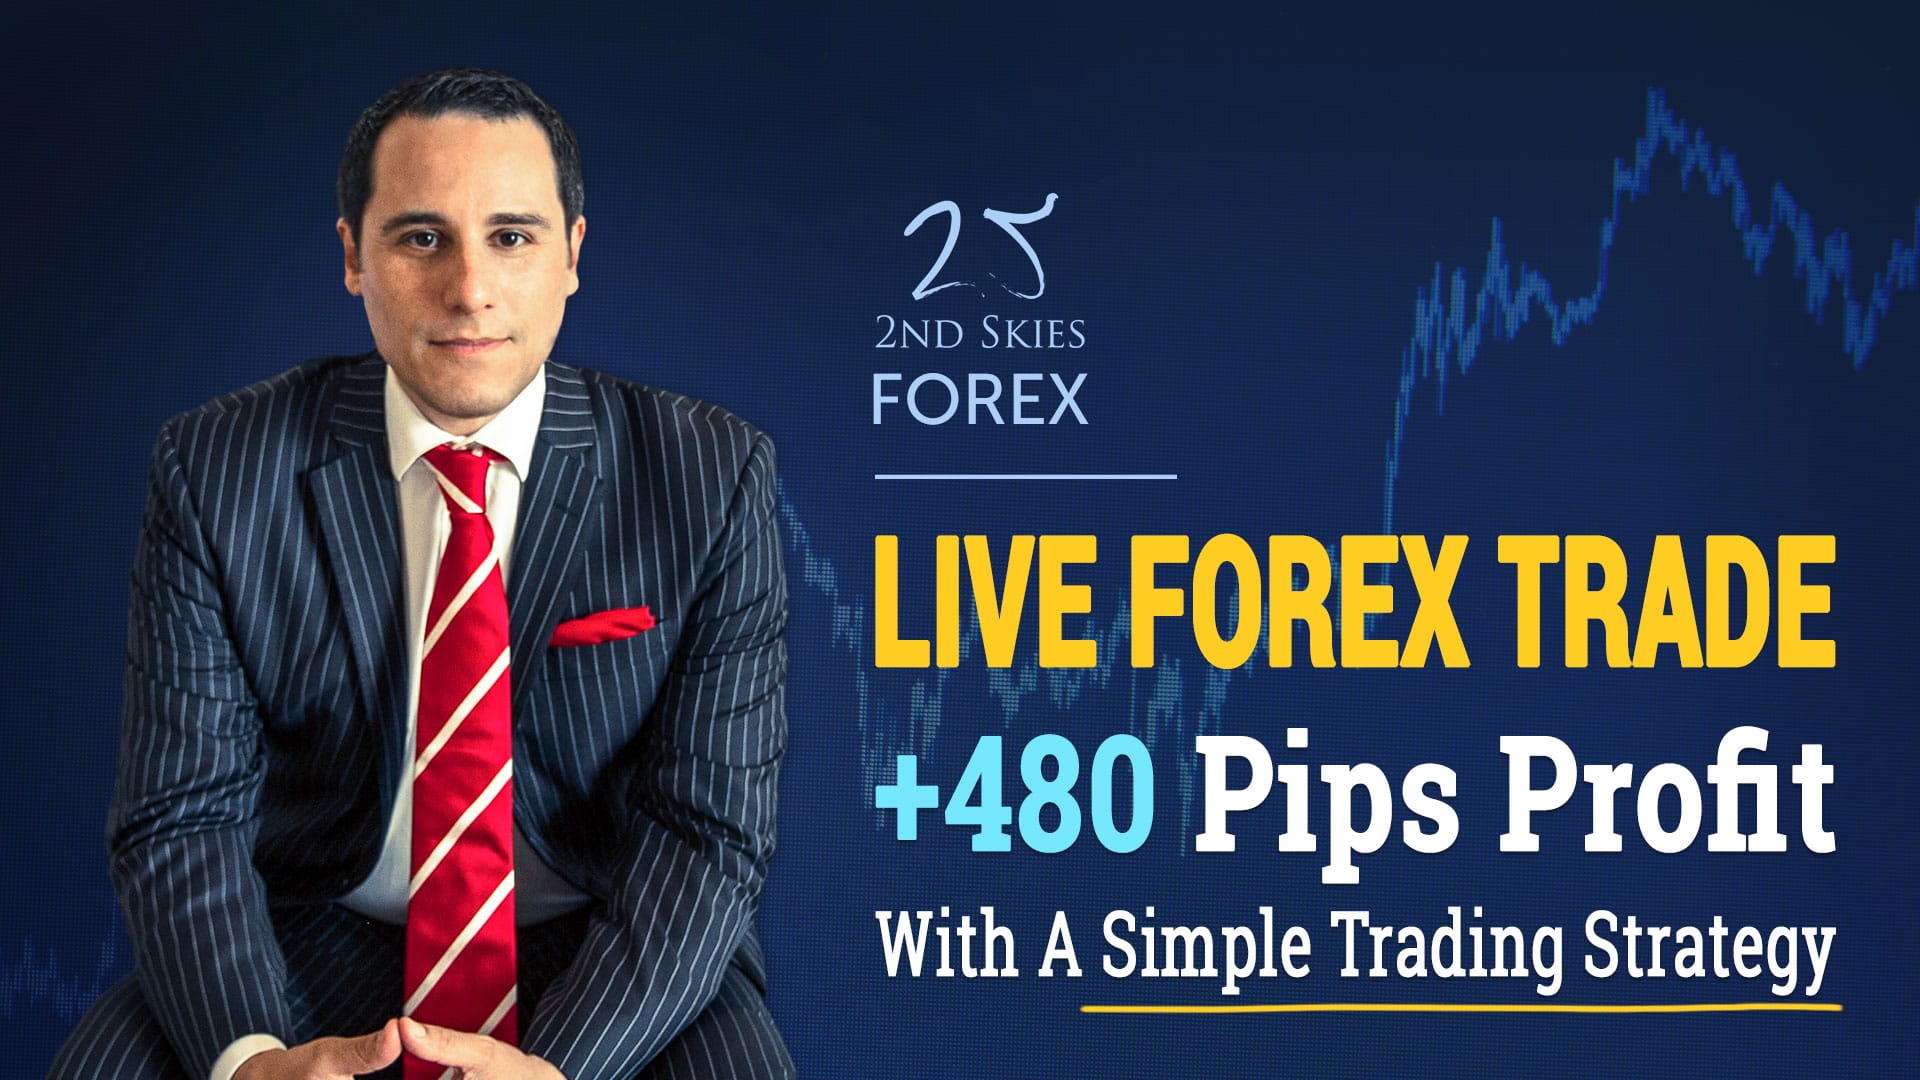 Best places to live as forex trader